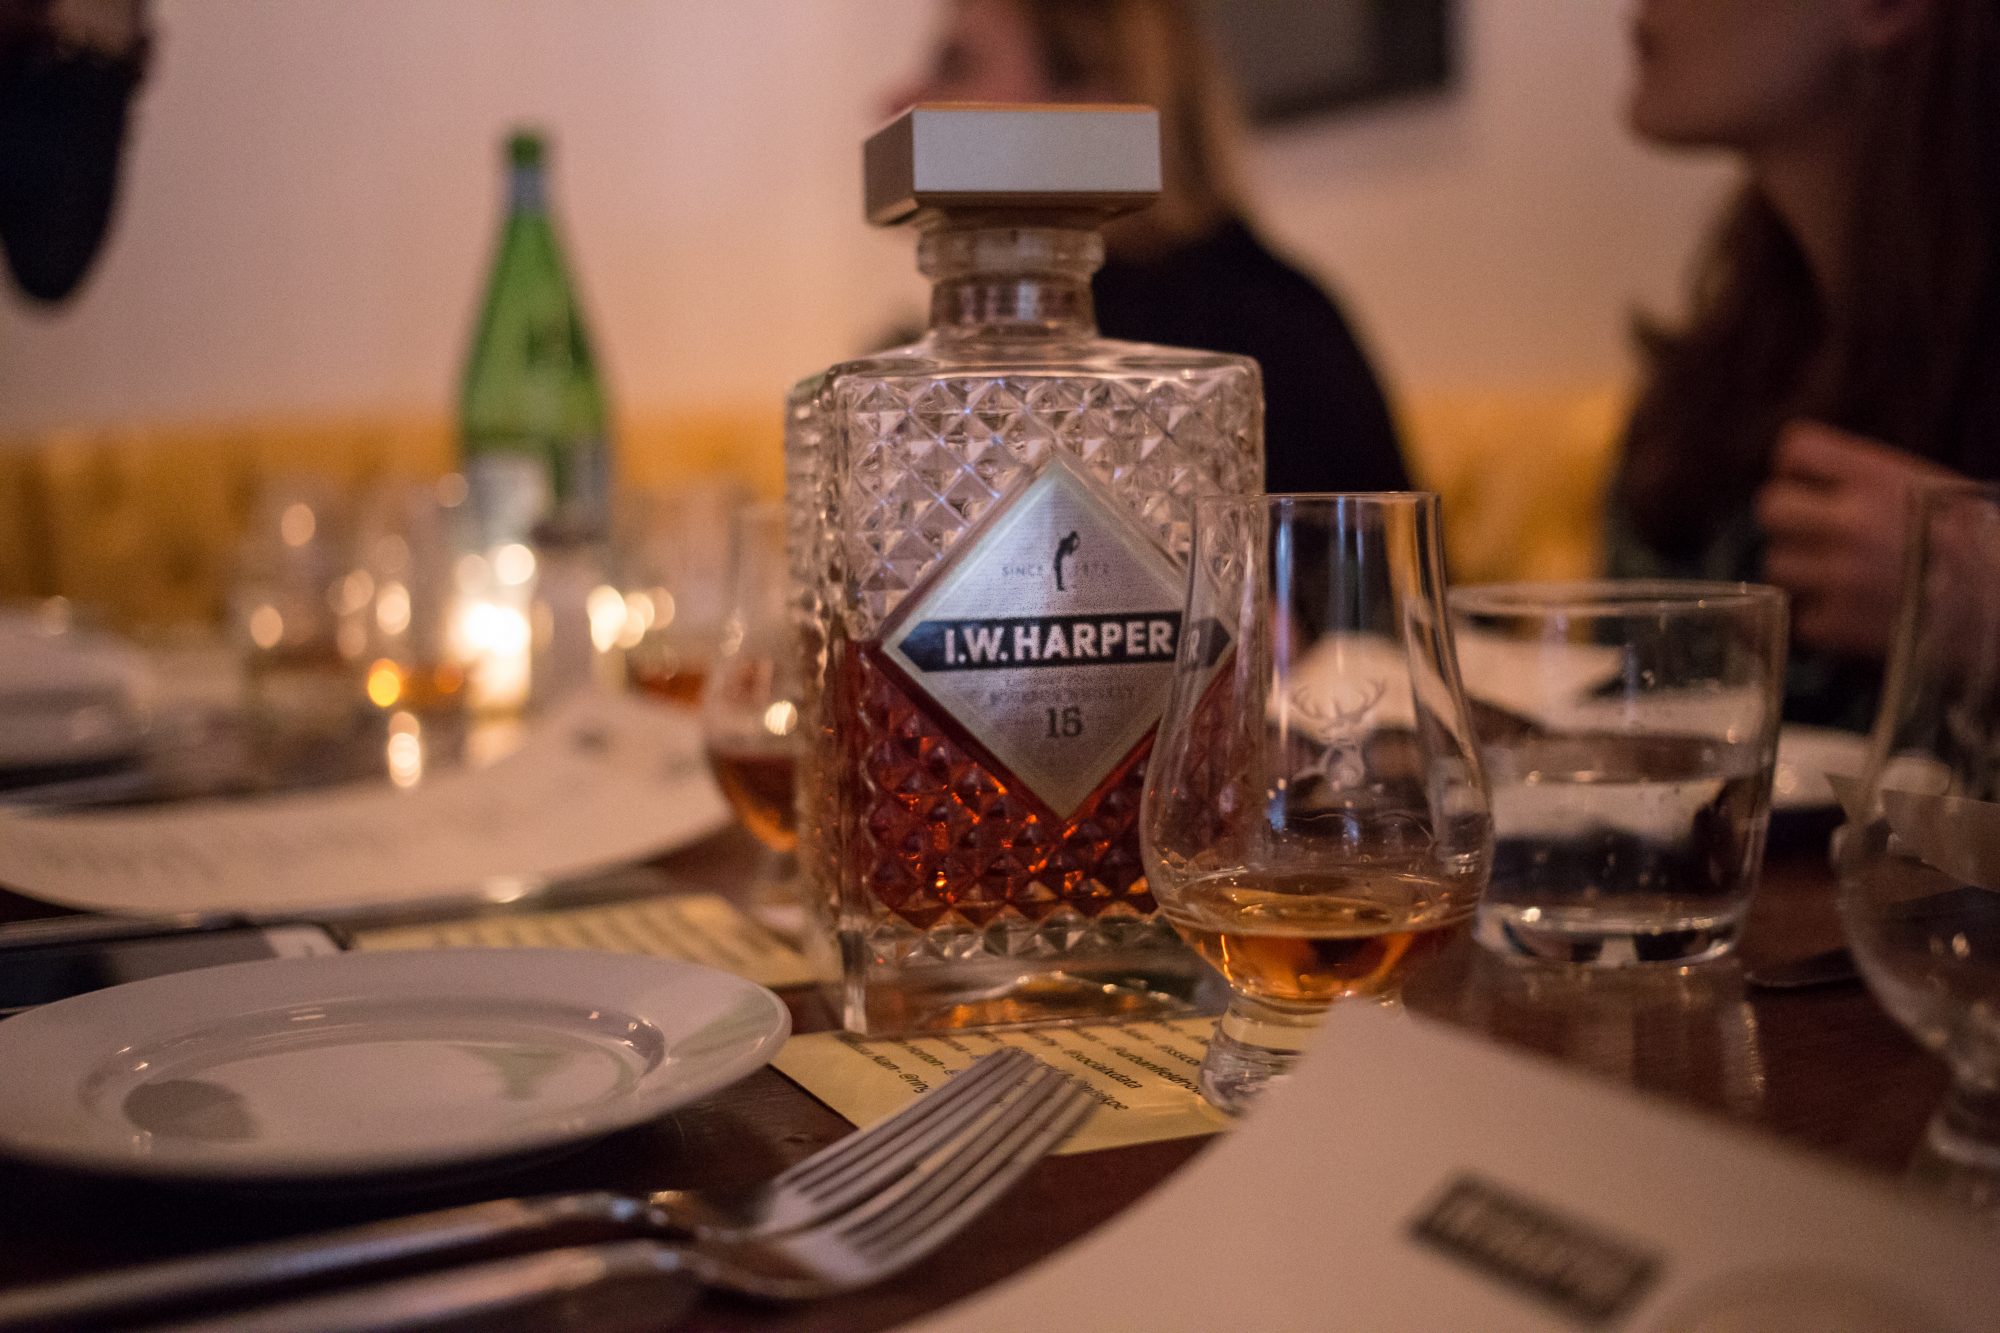 I.W. Harper Dinner With Men's Style Pro shot by Austin Horton at Twenty Manning Grill Philly